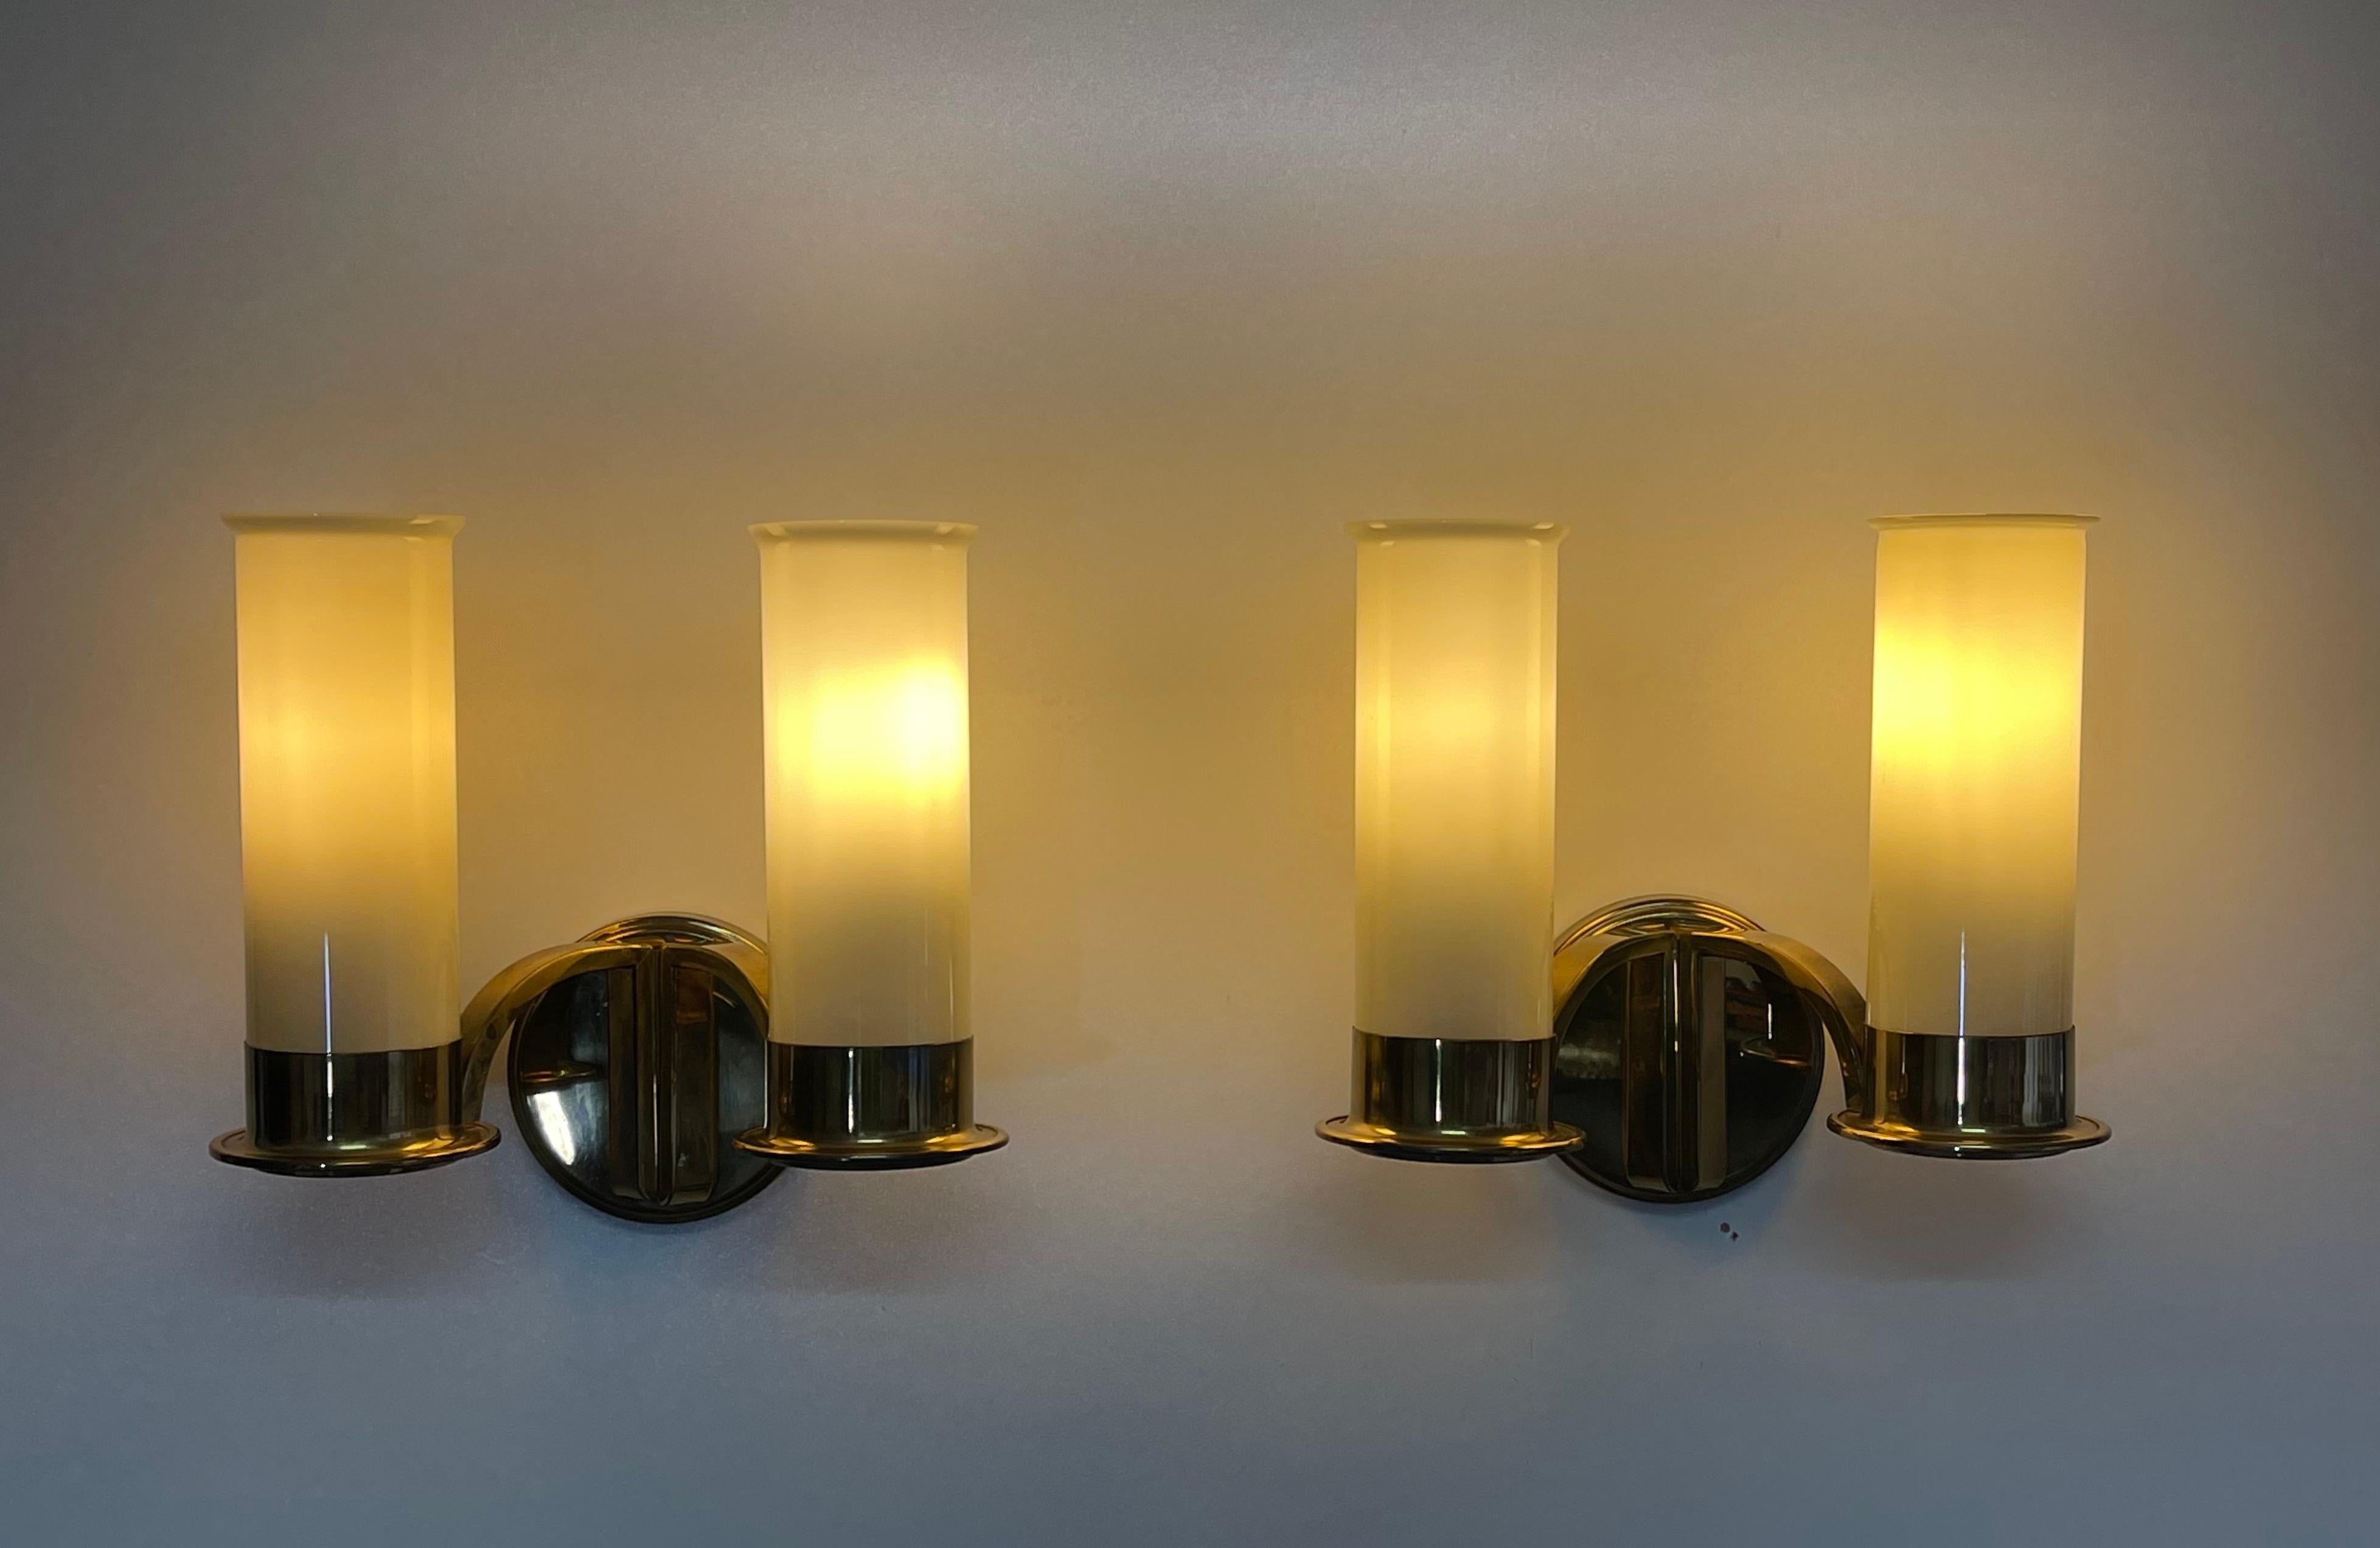 A stunning set of four Art Deco glass and opal brass wall lights, circa 1930s.
Made of polished brass and opal glass tubes.
Socket: each 2 x Edison (e27) for standard screw bulbs.

The condition is excellent.
(A matching chandelier is also